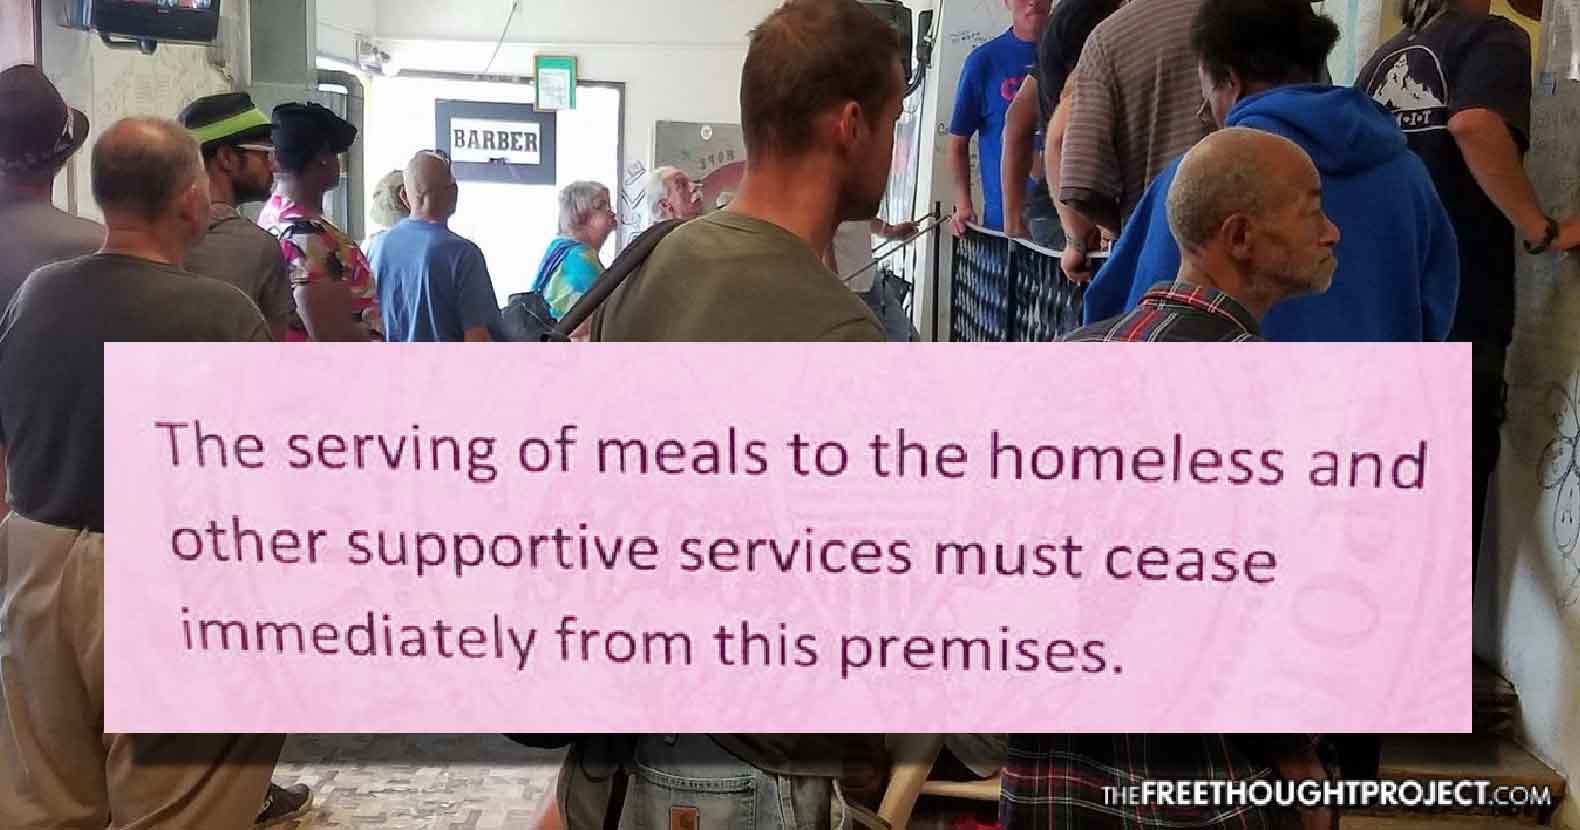 hundreds suffer as city shuts down church for helping the homeless